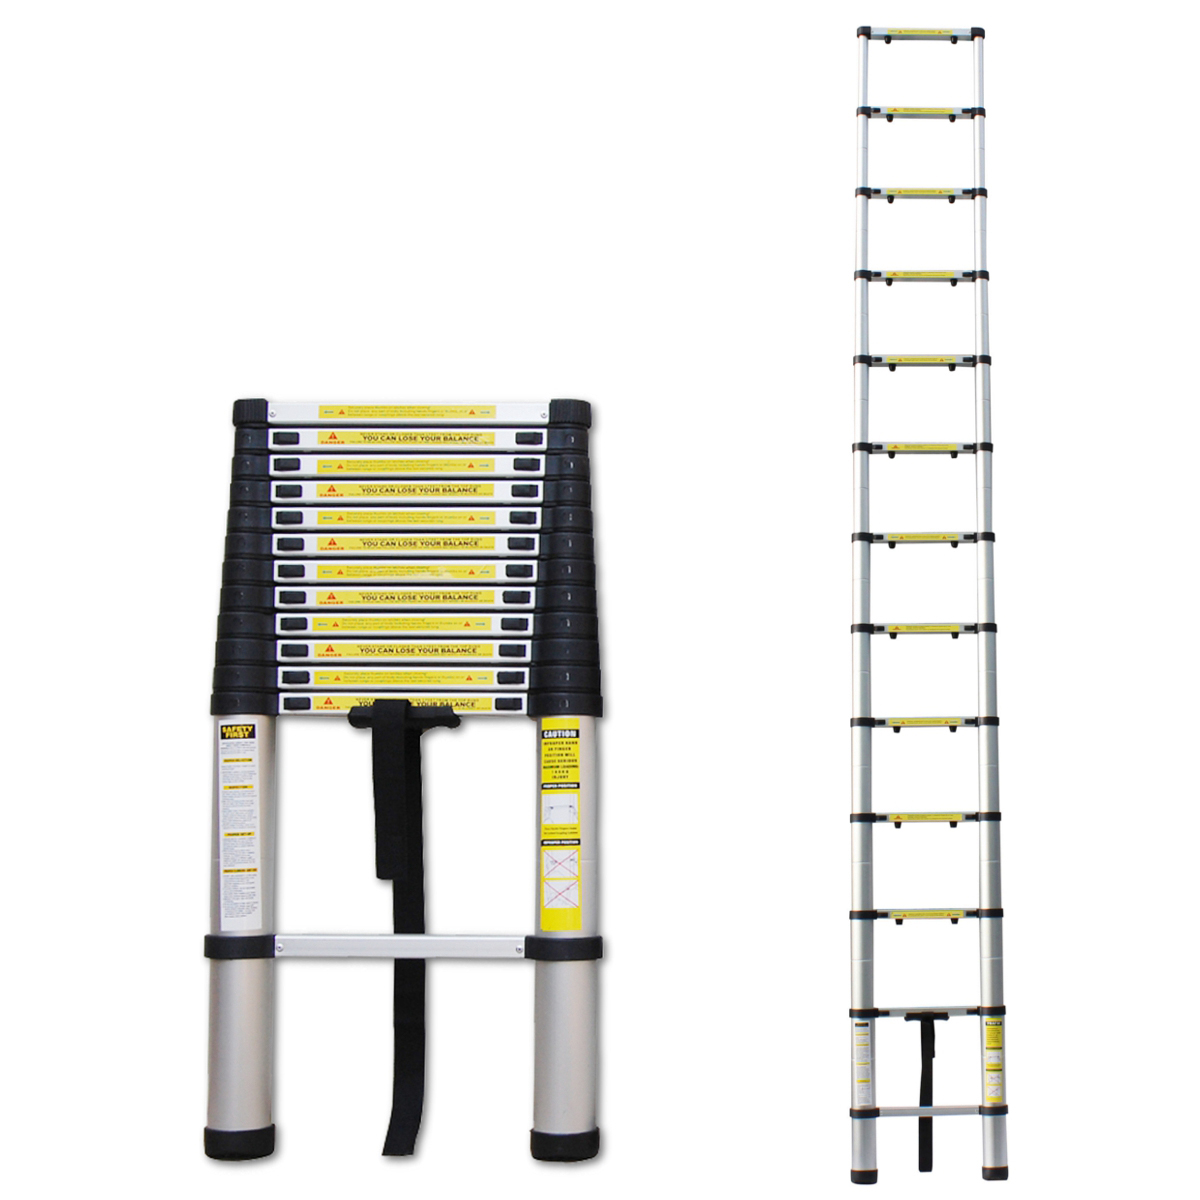 

Portable Telescopic Aluminium Ladder 3.8m Foldable Extendable Ladder Multi-Purpose Tools for Home Office Indoors Outdoors